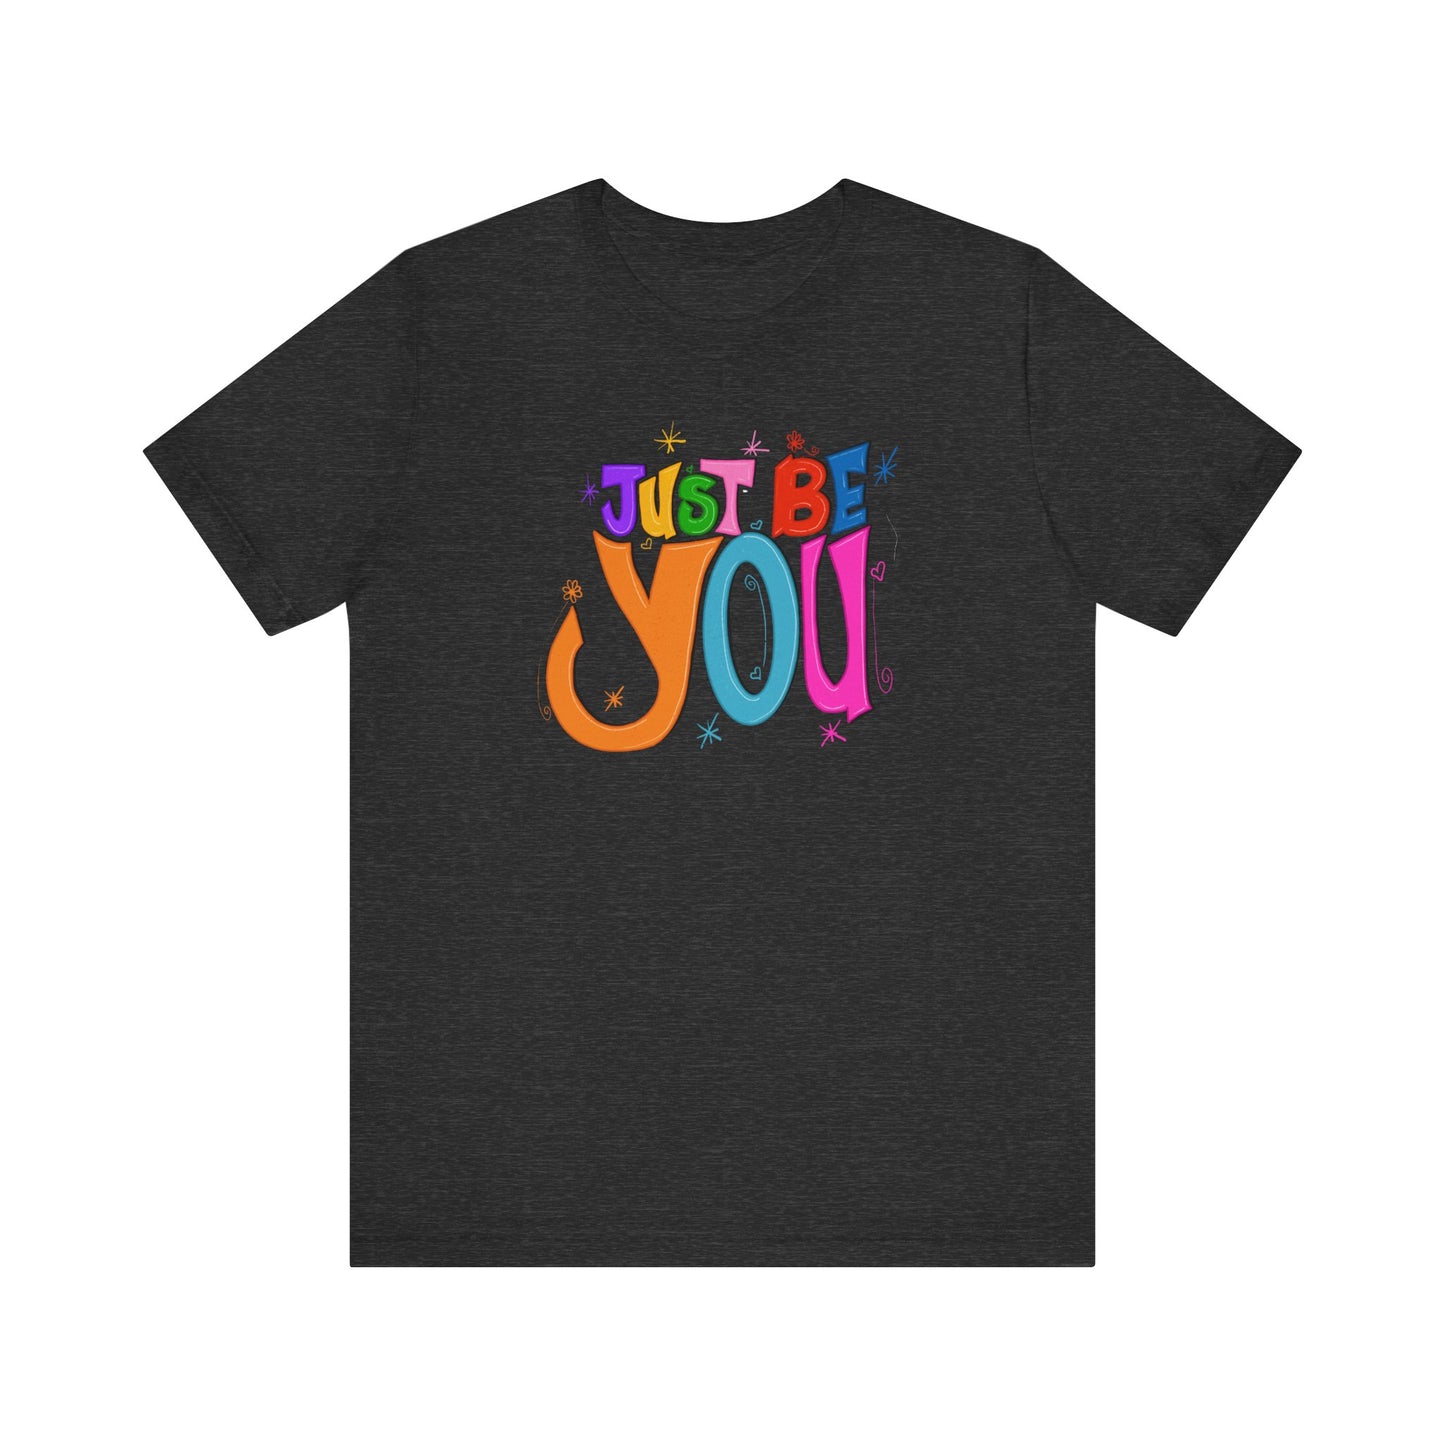 Just Be You Unisex Jersey Short Sleeve T-shirt | Available in Five Colors & Six Sizes | FREE SHIPPING